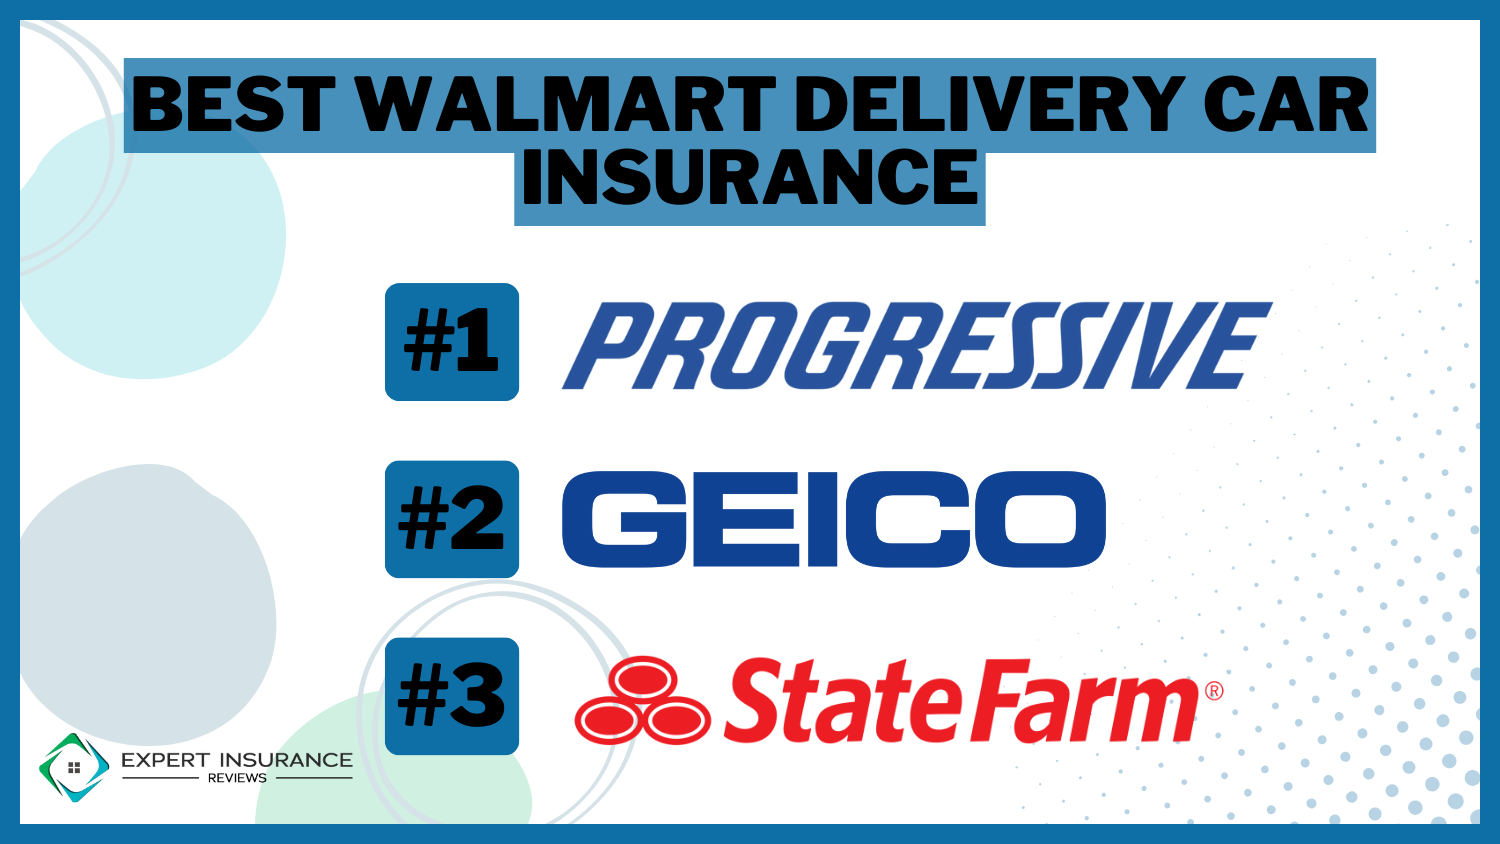 Best Walmart Delivery Car Insurance: Progressive, Geico, and State Farm